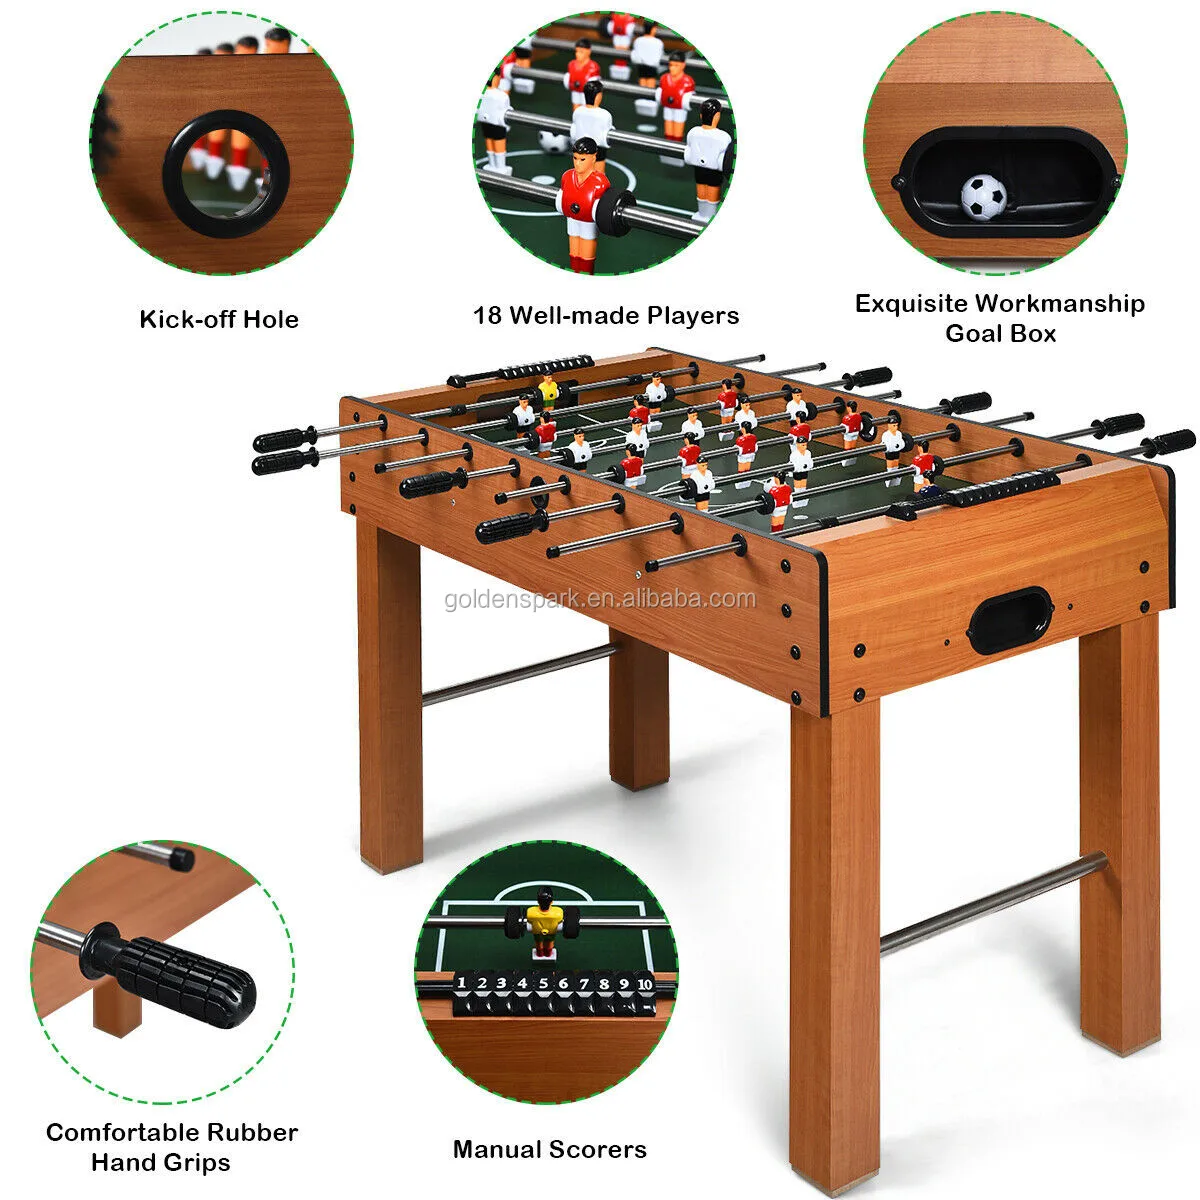 Adults Families Competition Sized Recreational Foosball Games for Arcades Bars Parties Family Night LUARANE 48 Foosball Table Indoor Multi Person Table Soccer Game w/ 2 Balls 